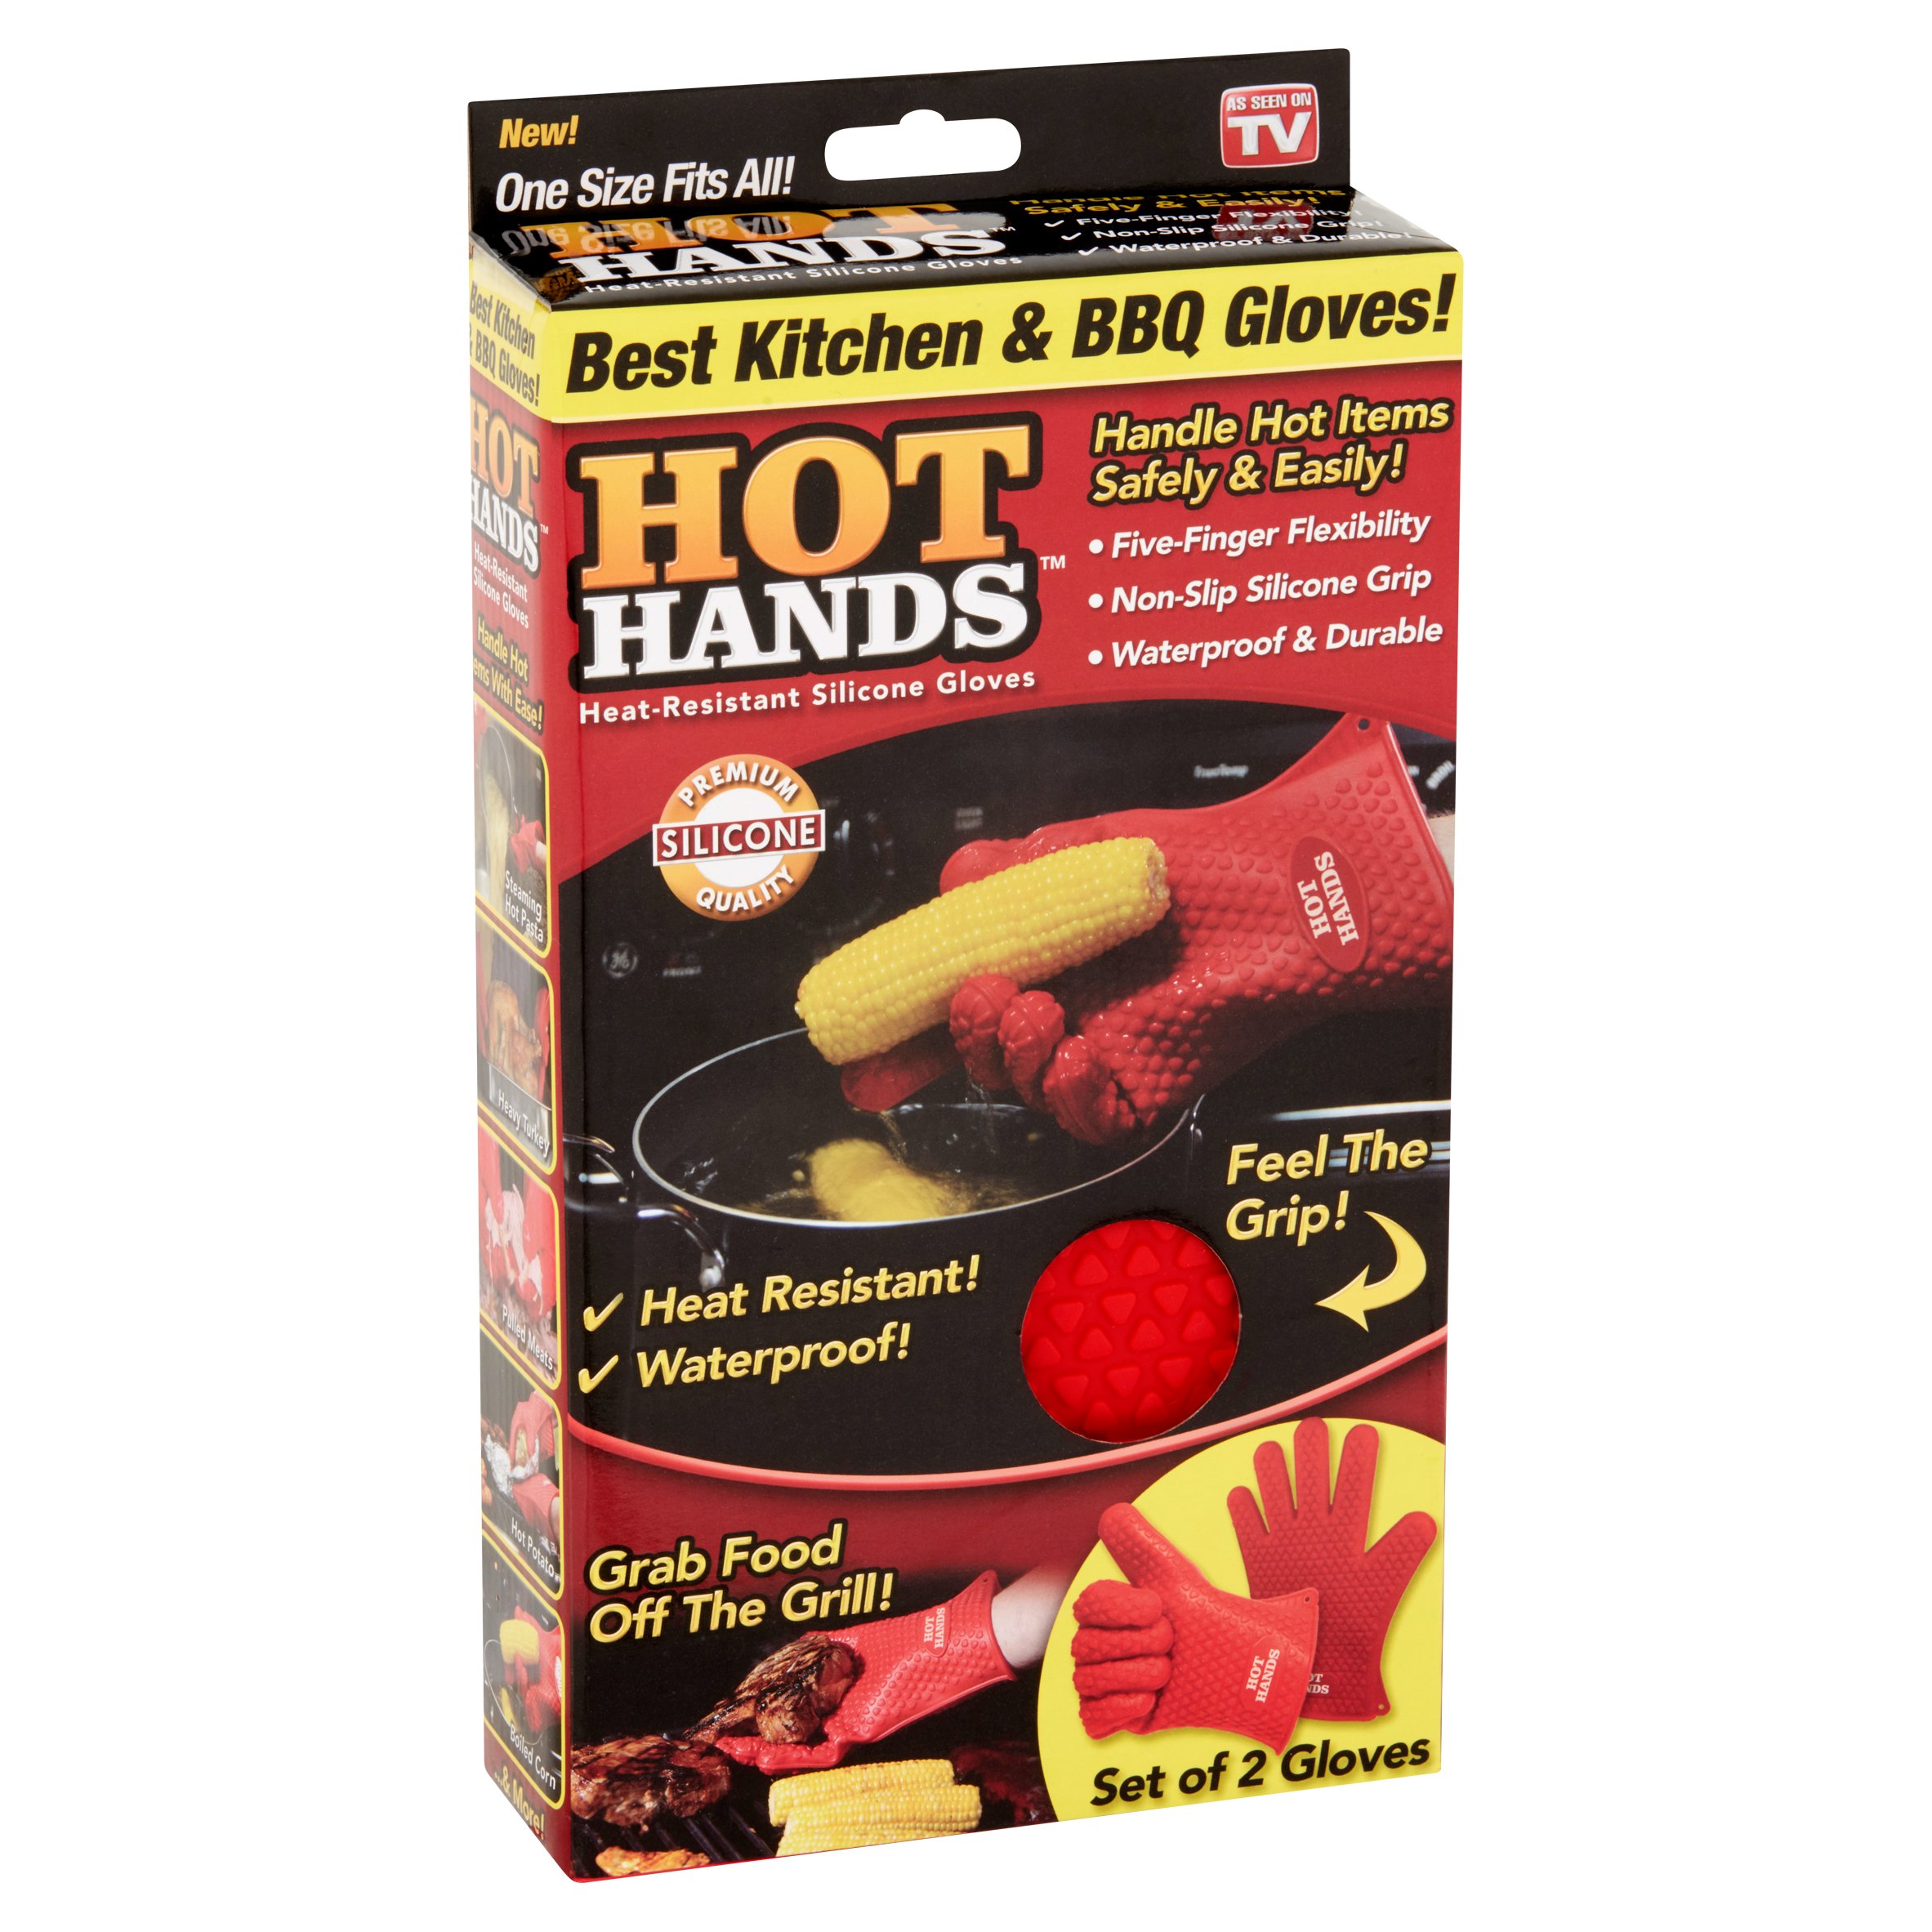 Hot Hands Heat-Resistant Silicone Gloves - image 2 of 5